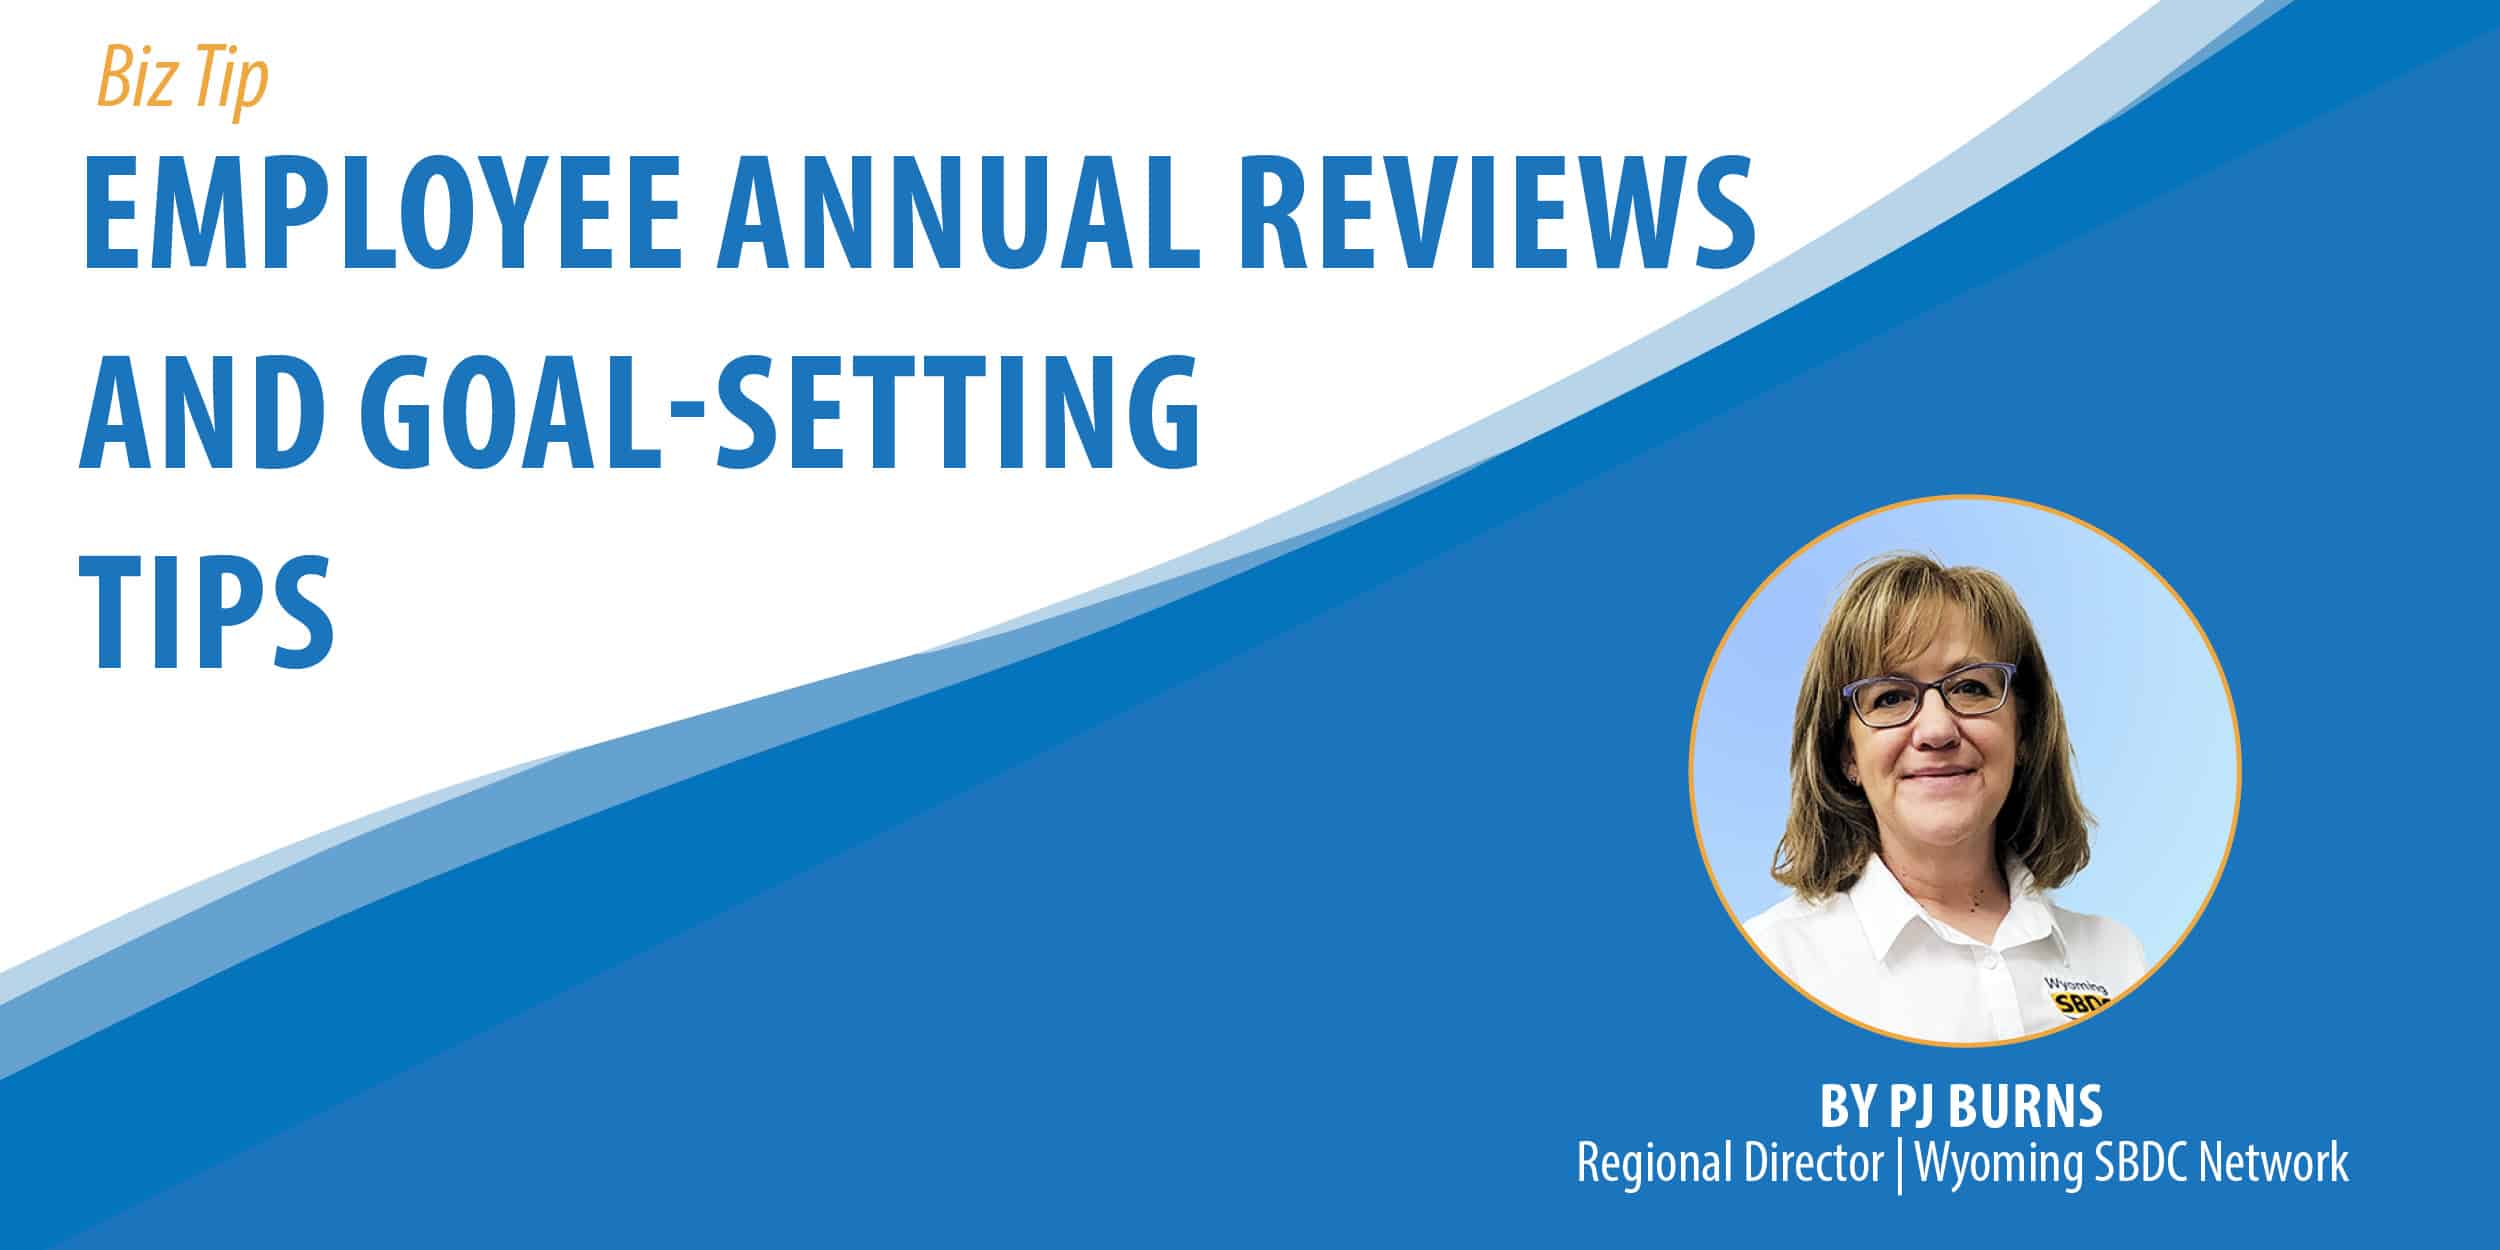 Employee Annual Reviews and Goal-Setting Tips